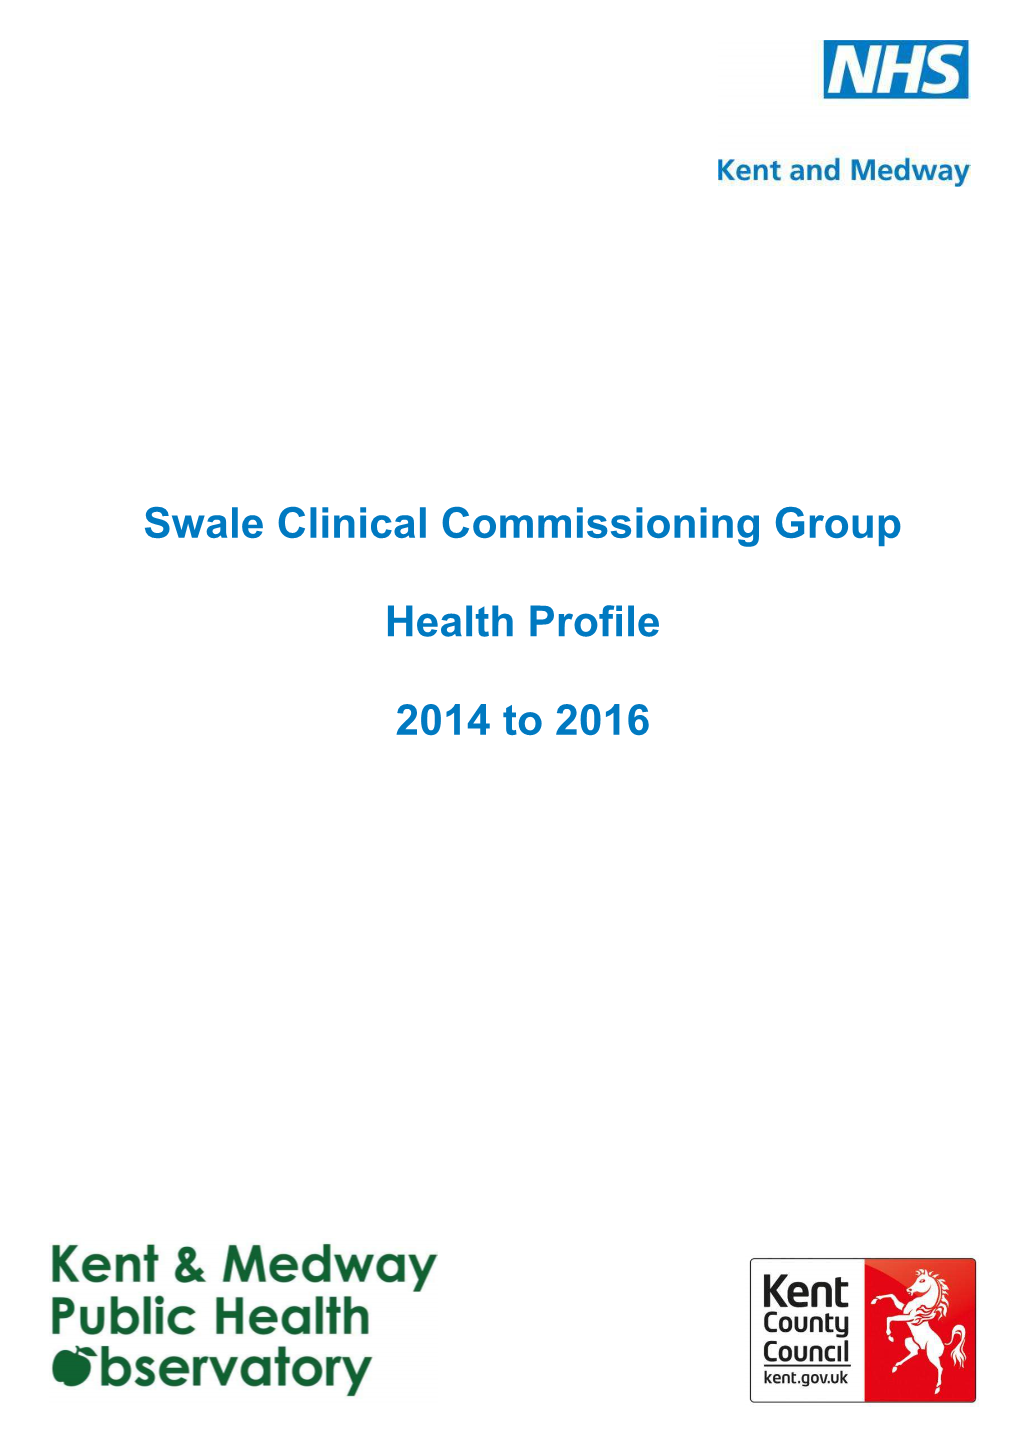 Swale Clinical Commissioning Group Health Profile 2014 to 2016